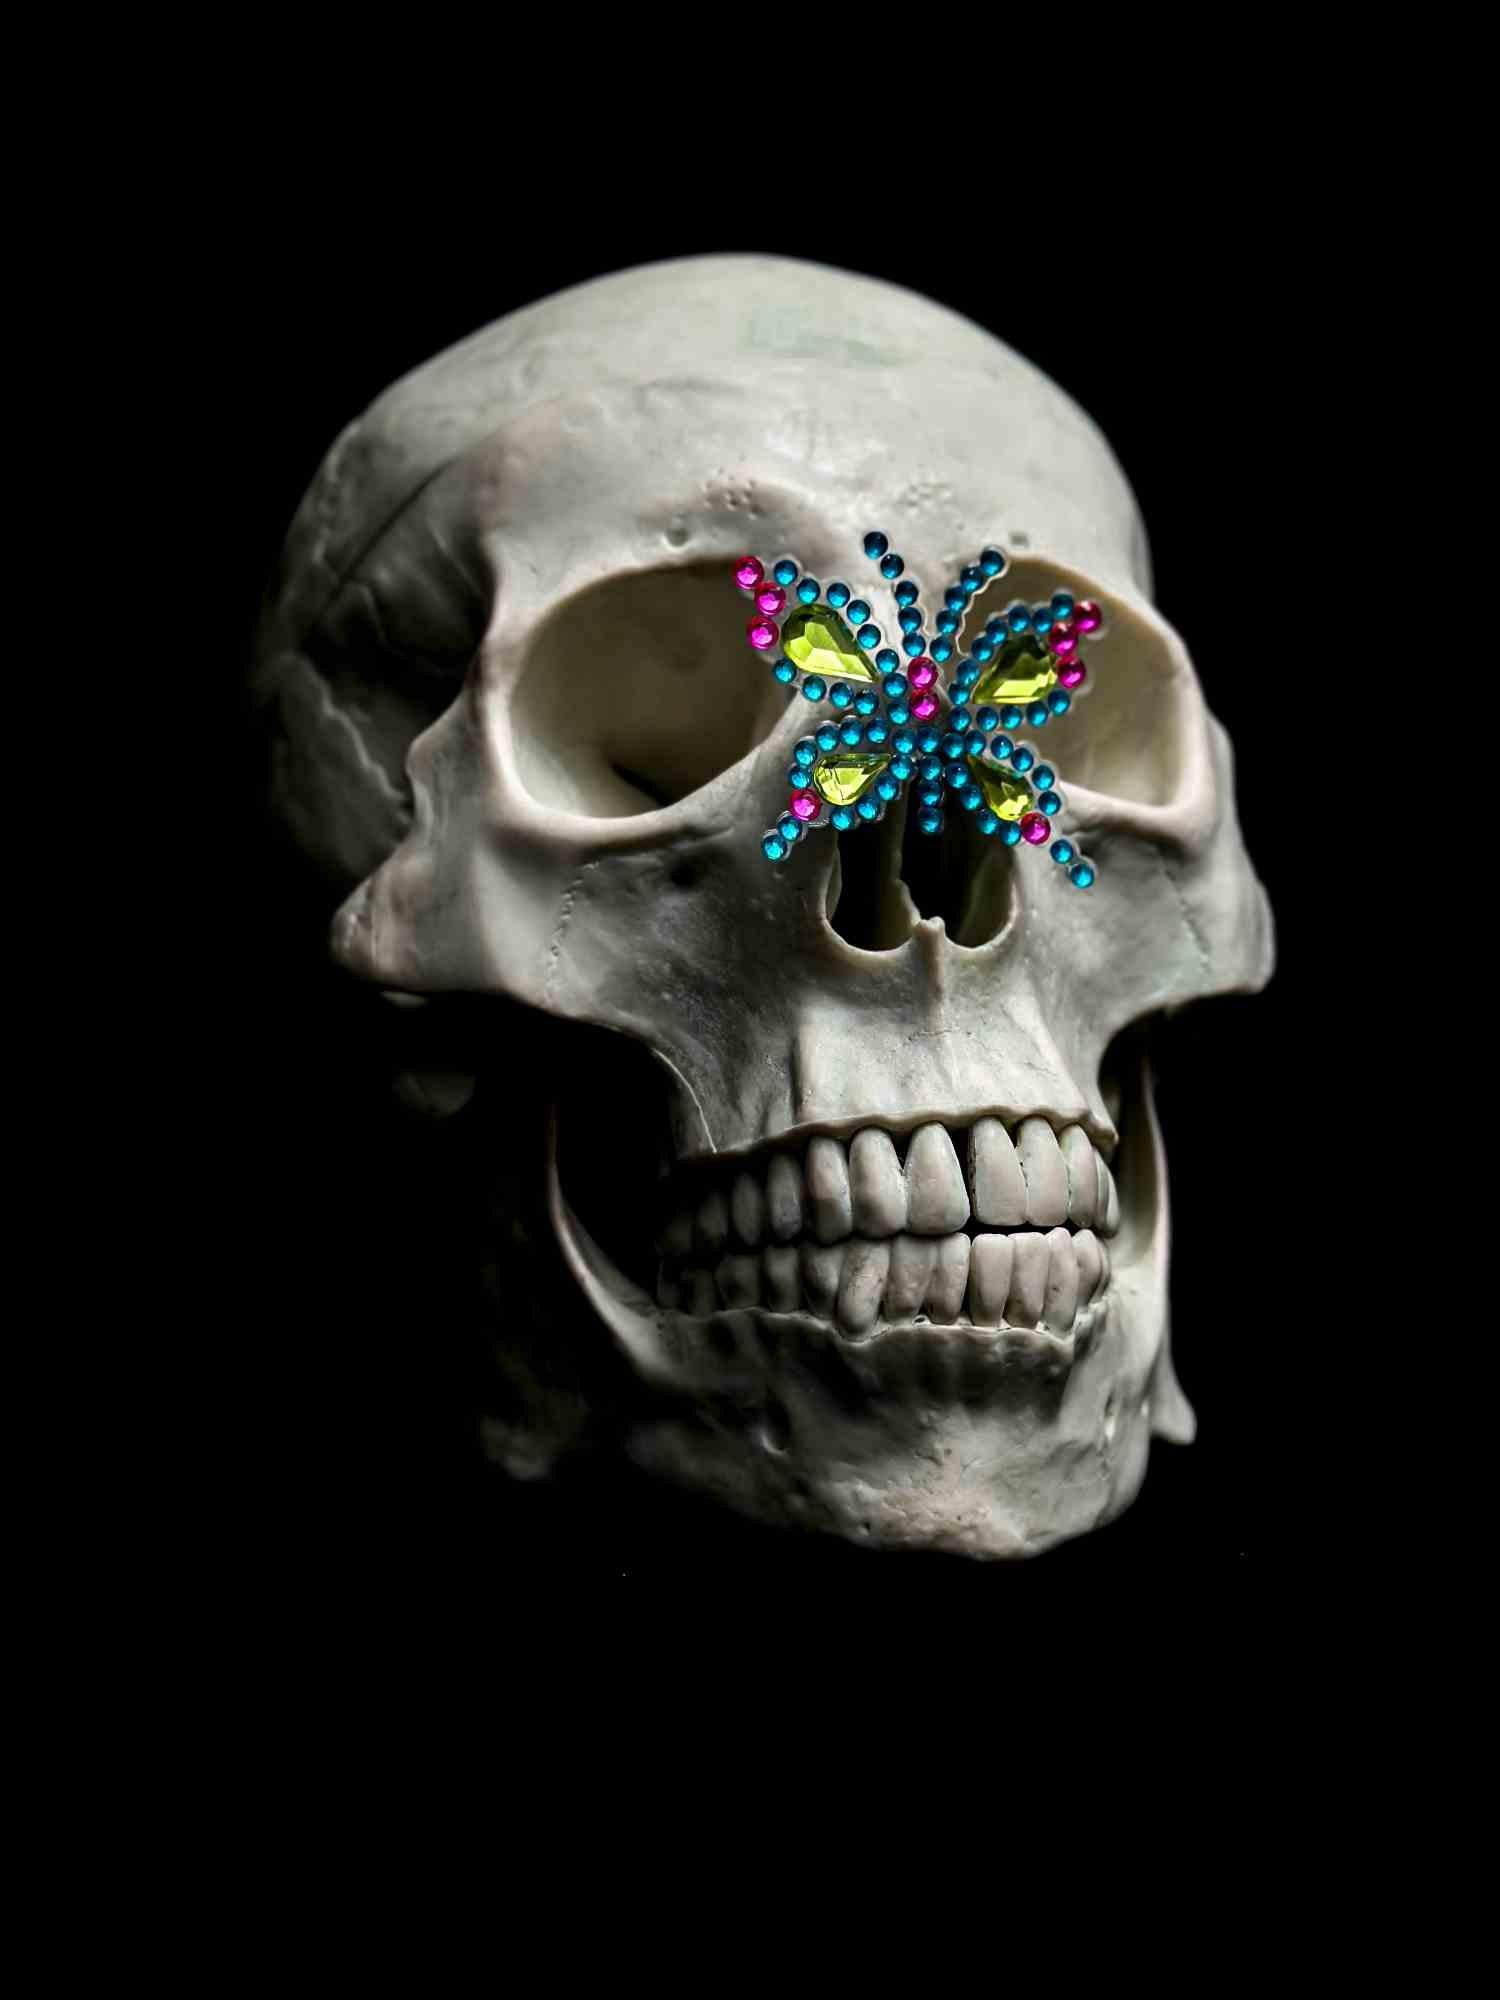 Still life photography with skull and butterfly, inspired by the symbolism and meaning of the butterfly of rebirth and the souls of our ancestors visiting us.